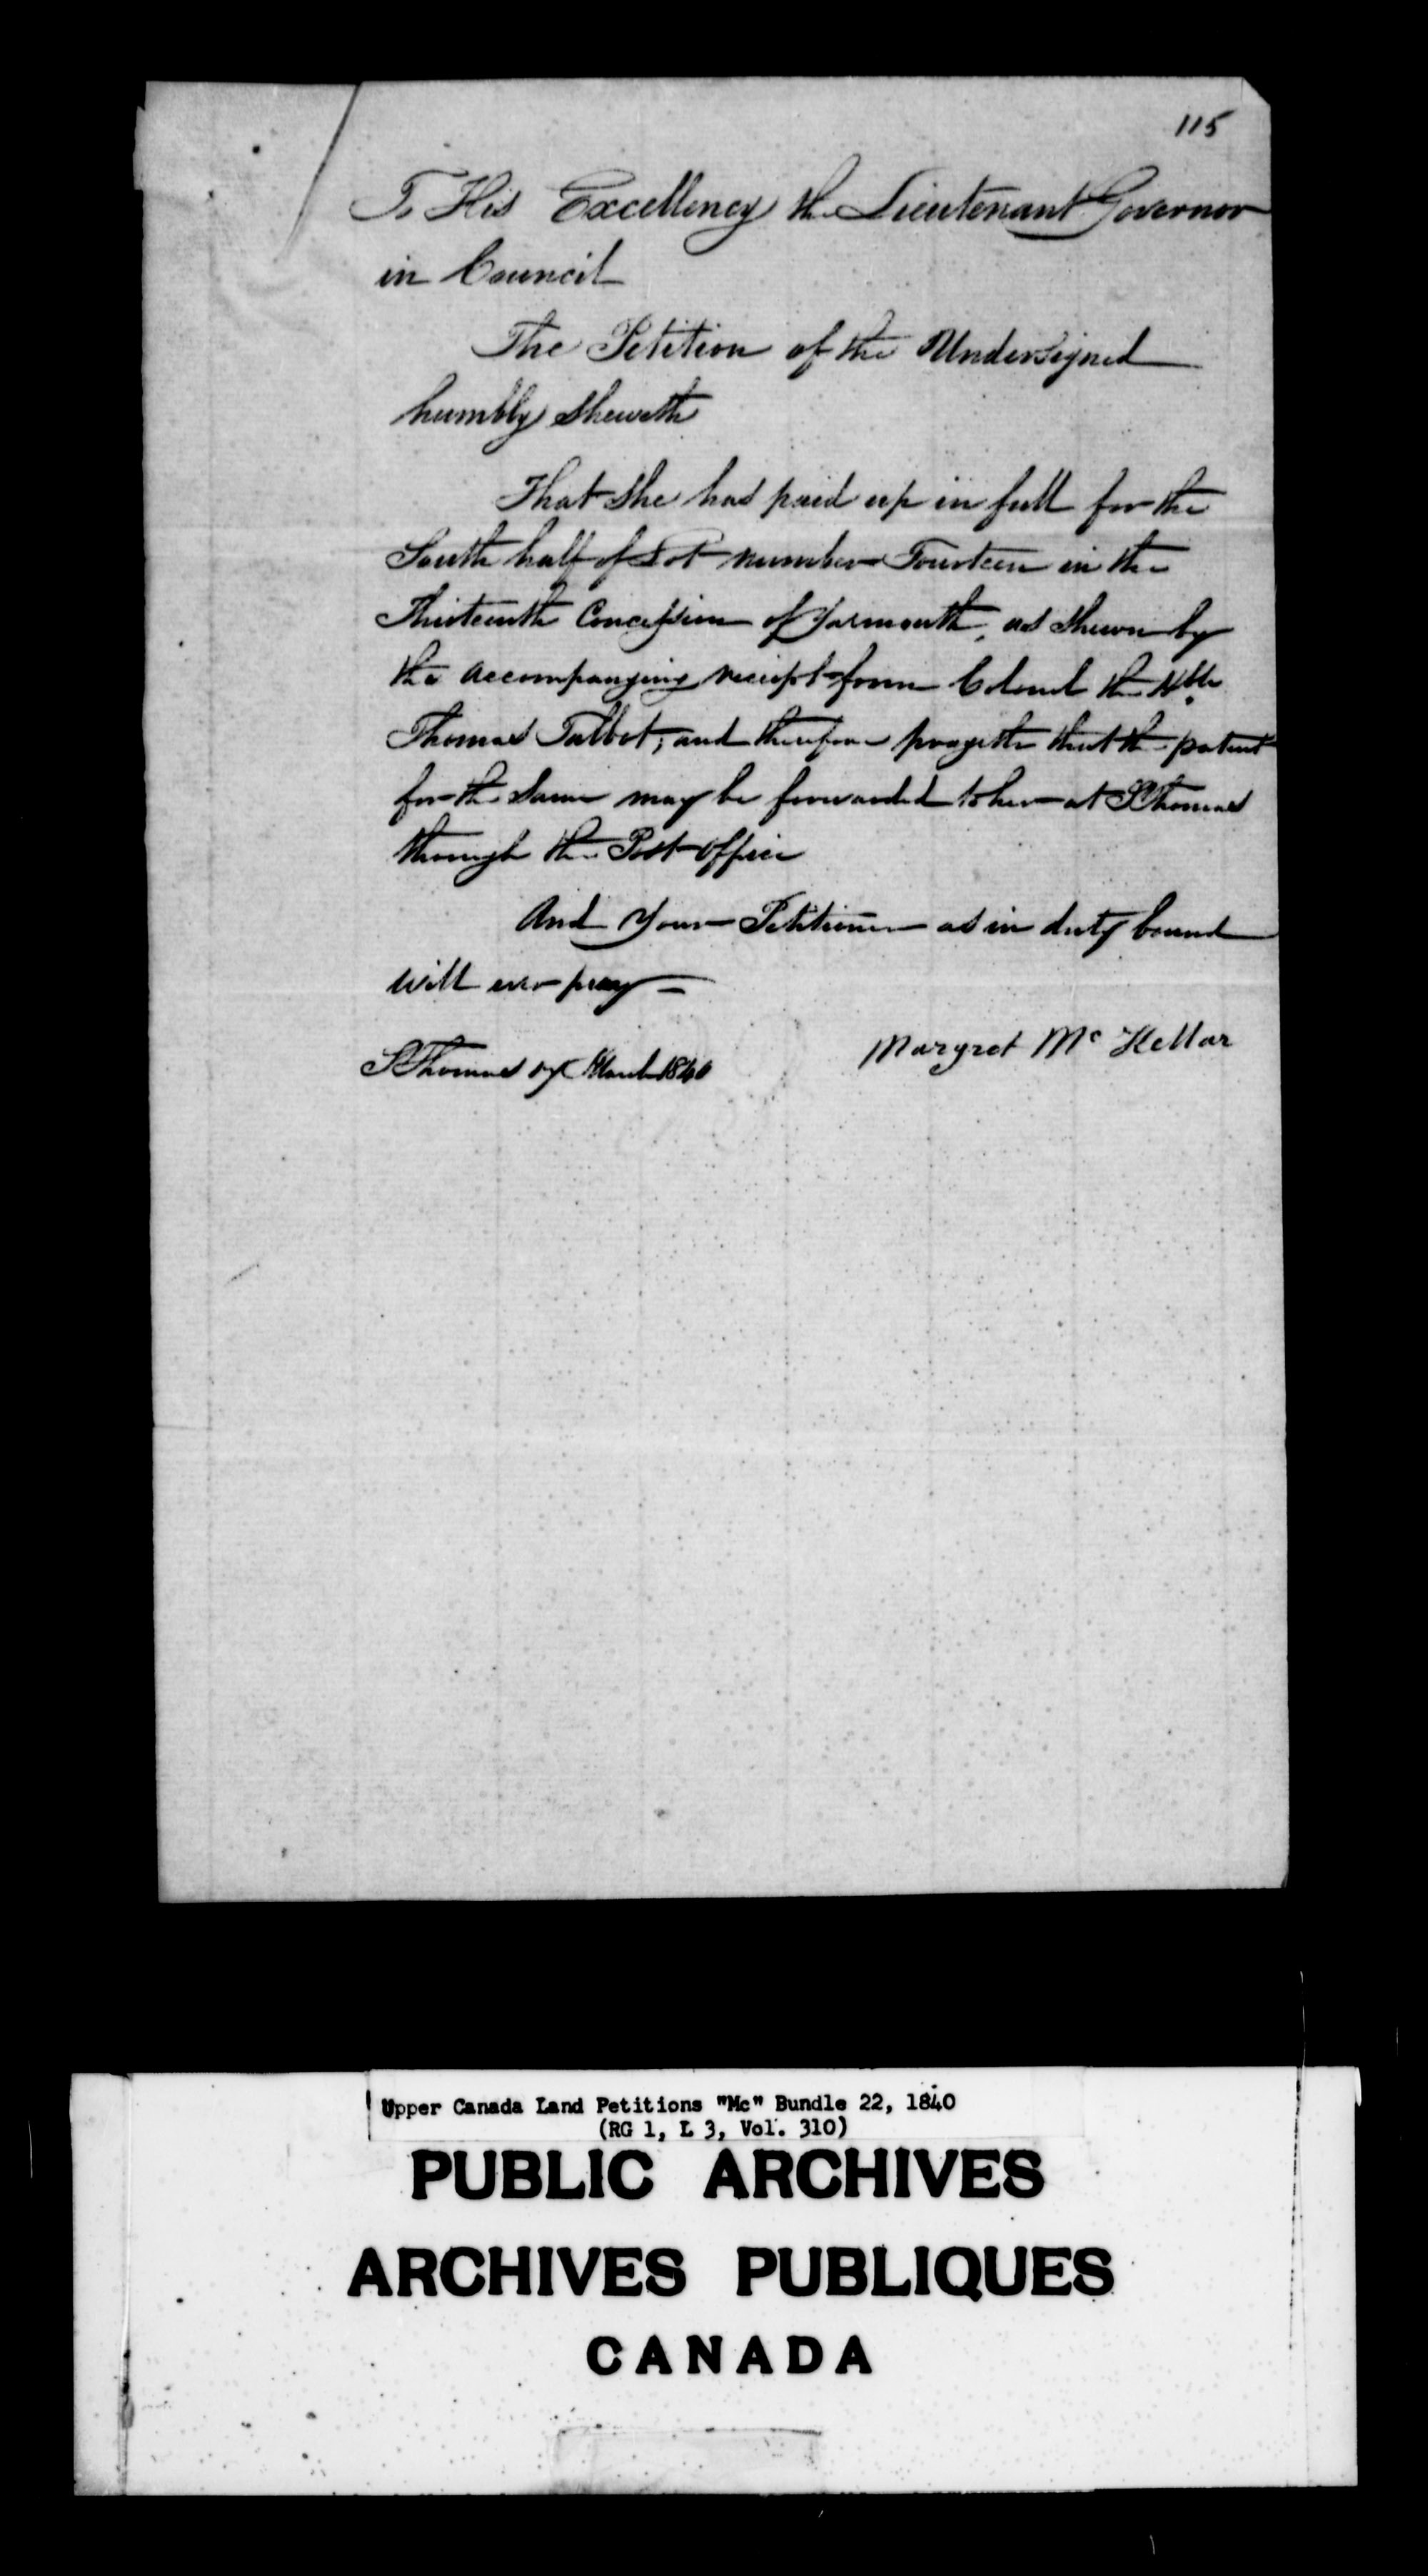 Title: Upper Canada Land Petitions (1763-1865) - Mikan Number: 205131 - Microform: c-2141